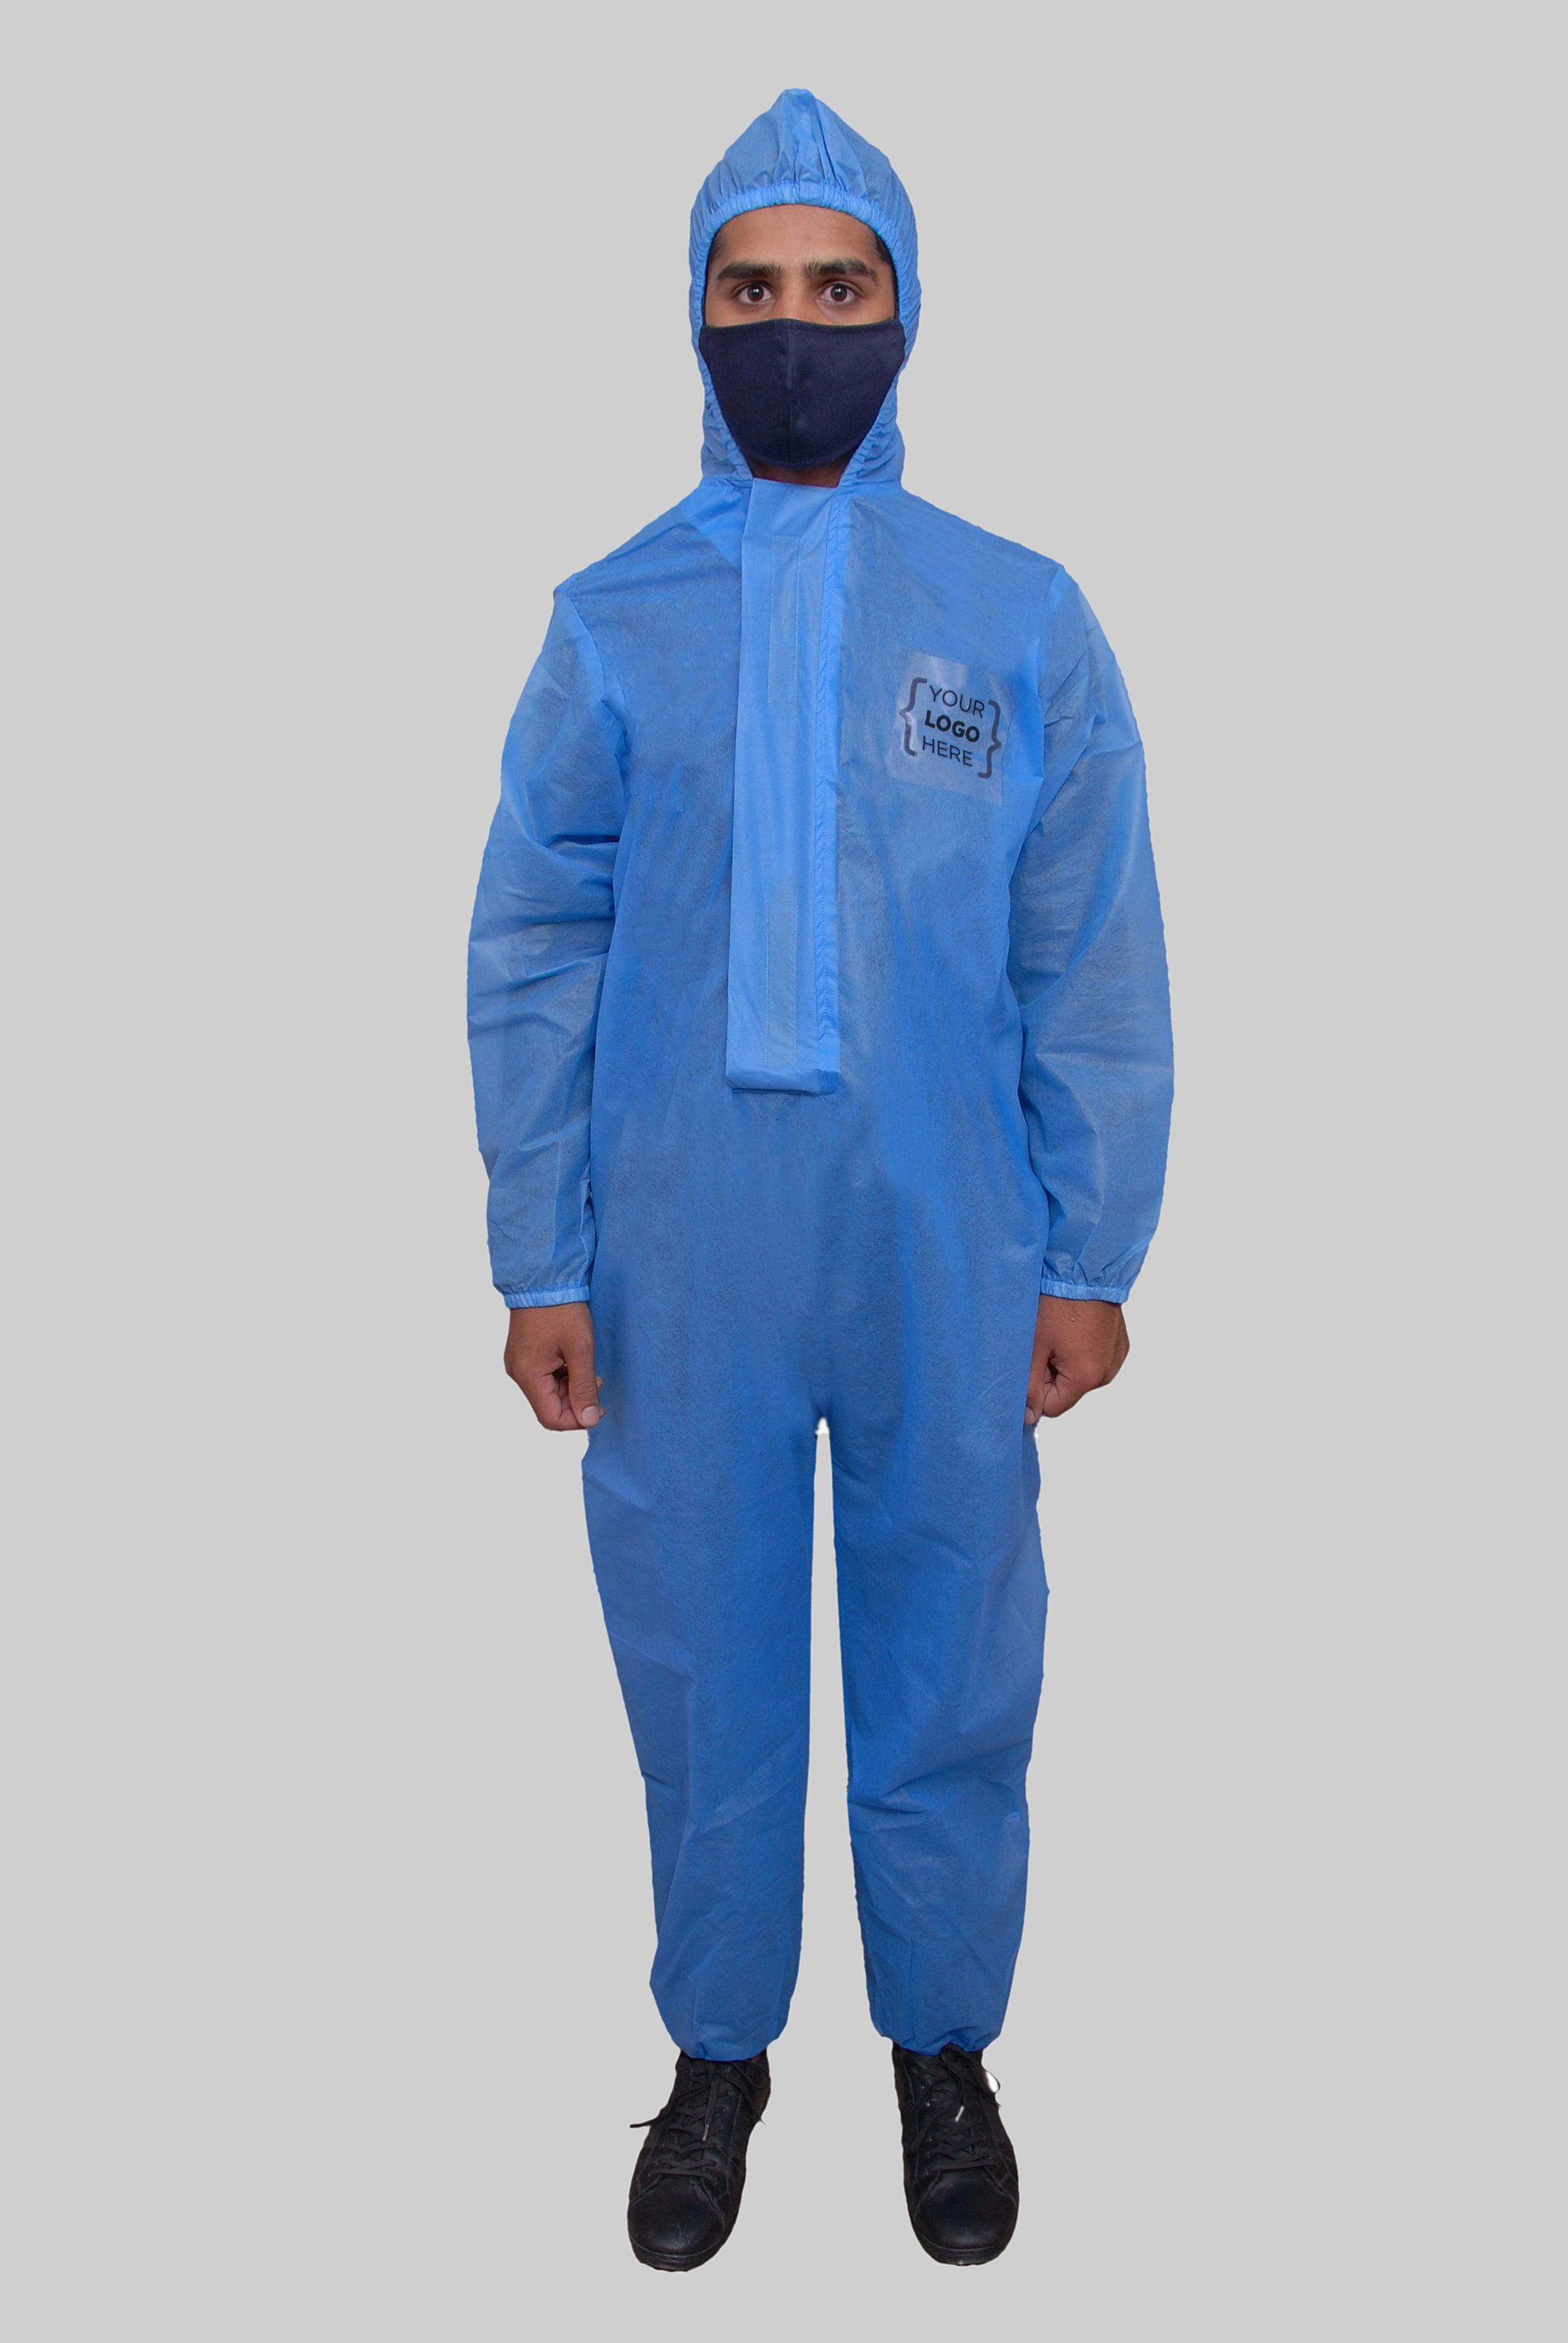 Product HAQ's | Hazmat Suit & Mask Costume | Disposable Protective Coverall image